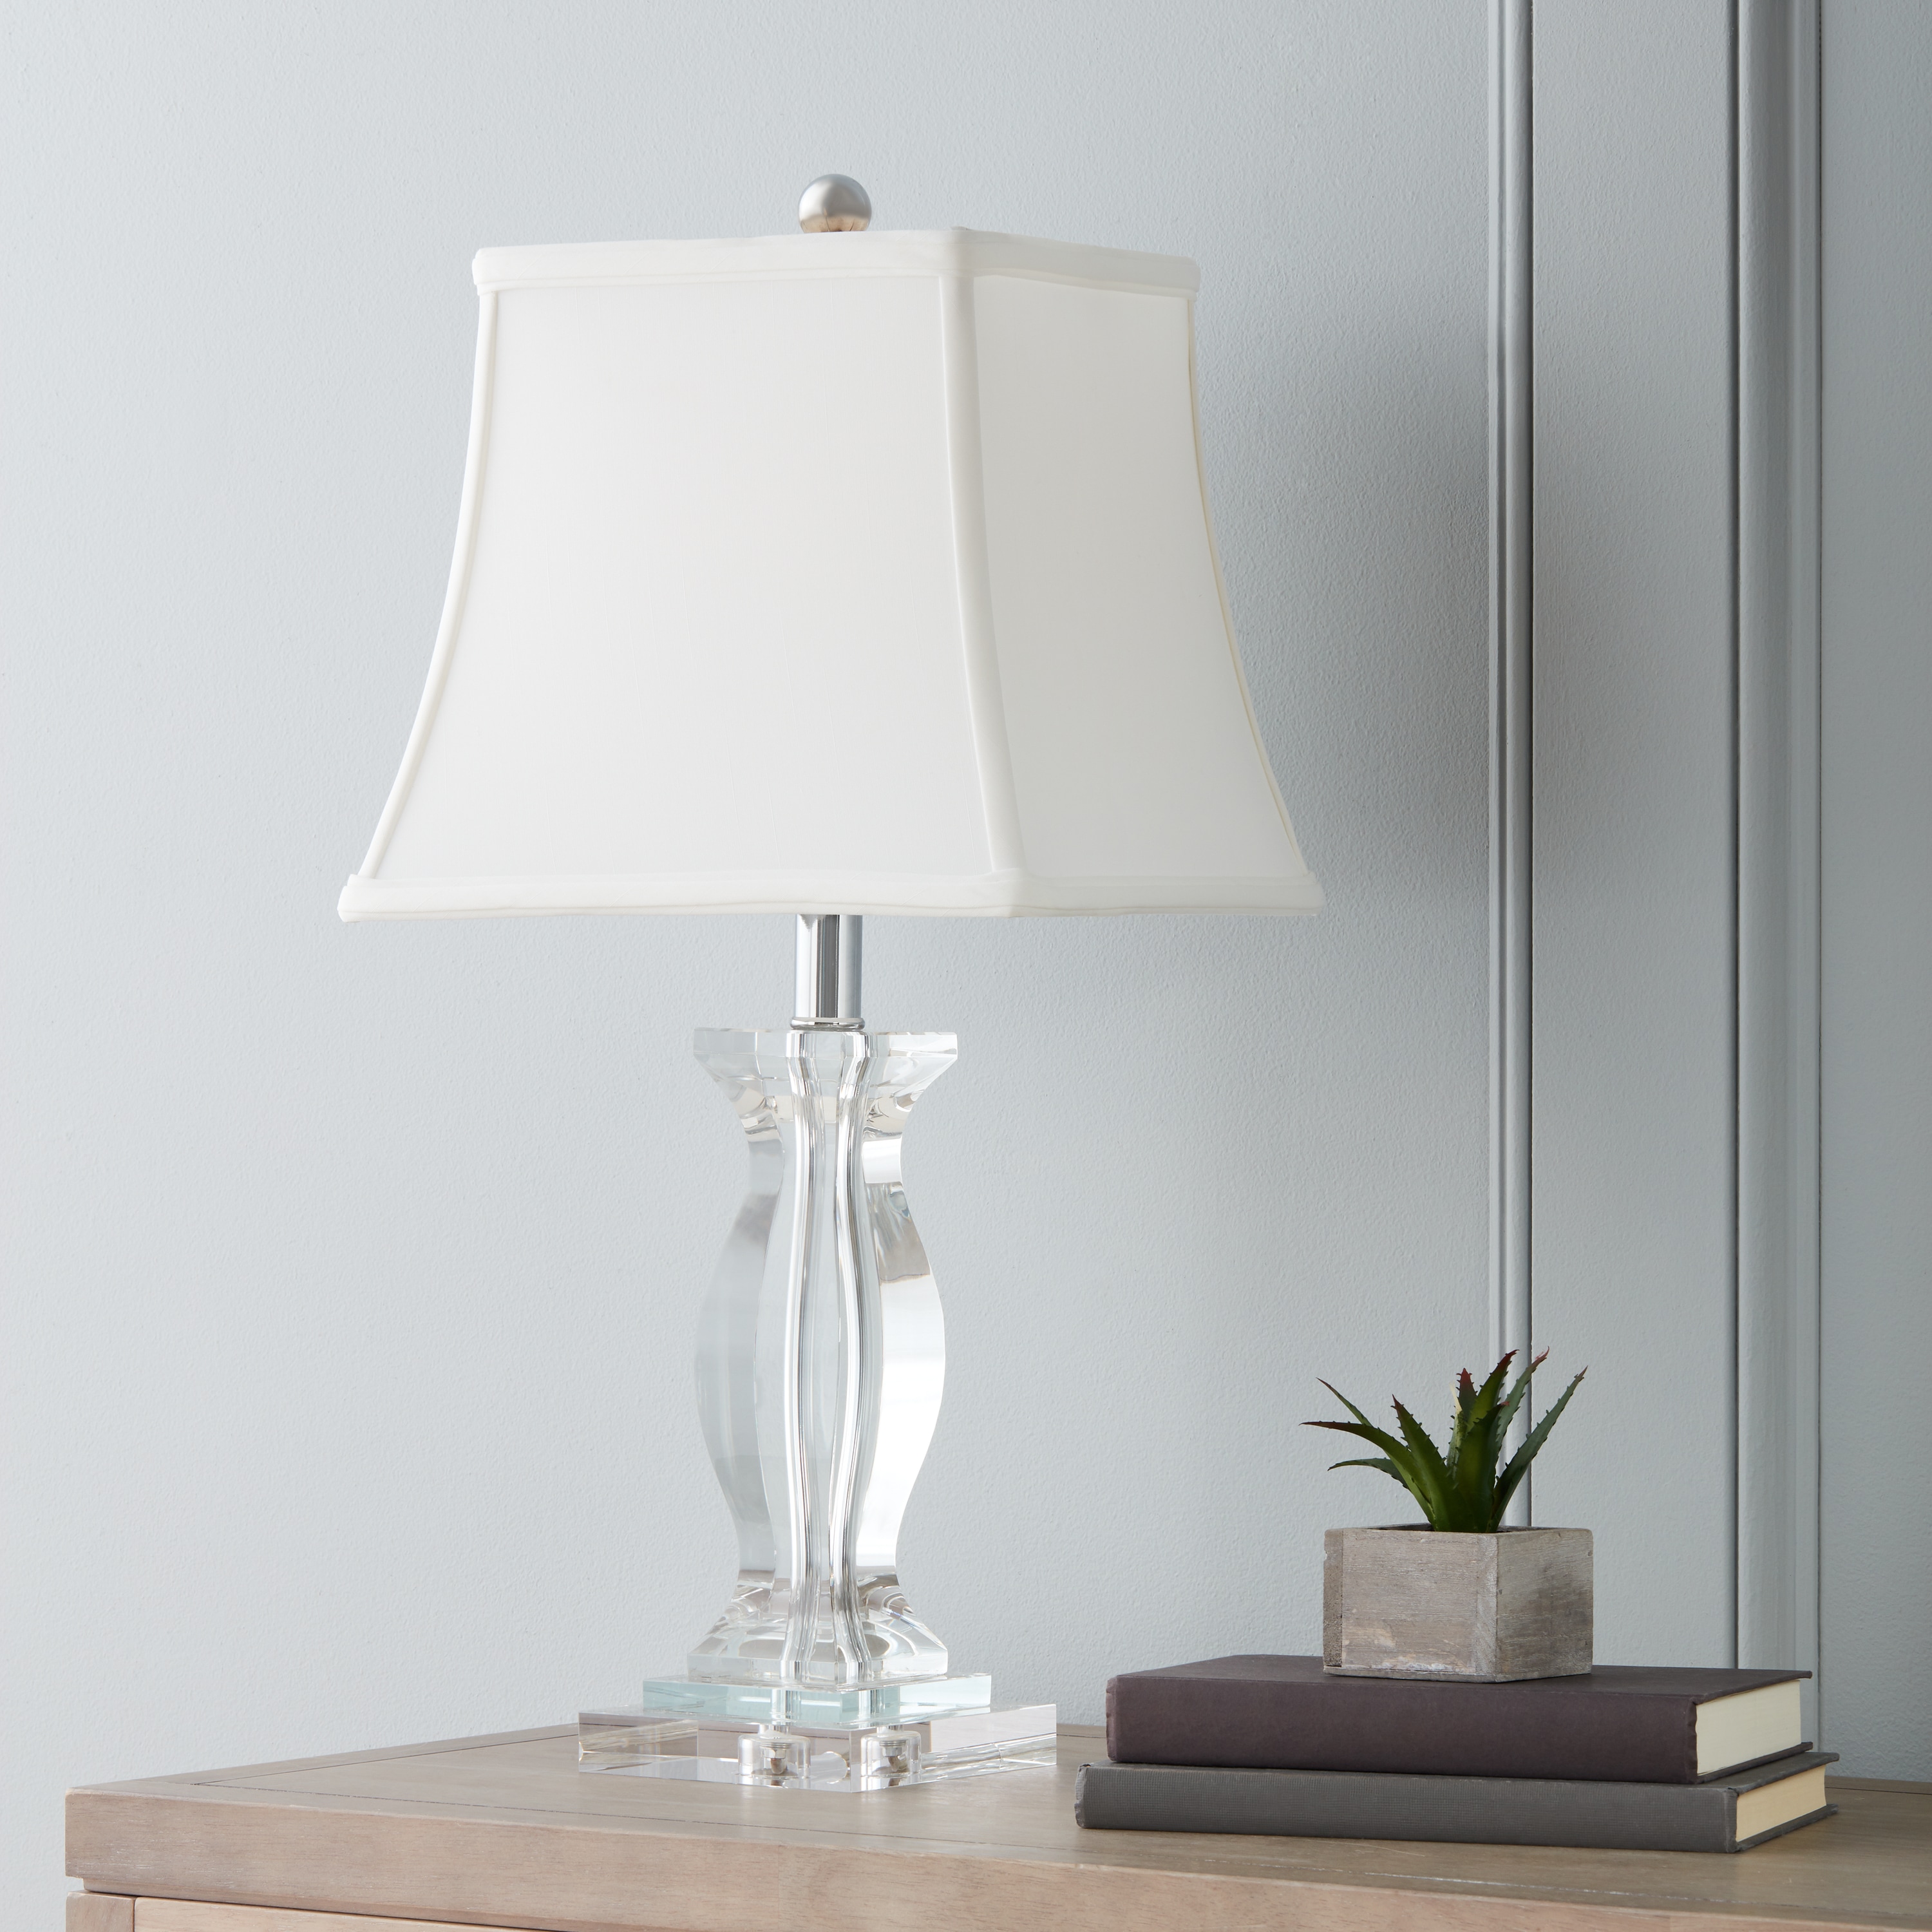 3 Way Table Lamps For Living Room : Want to brighten up dark corners or